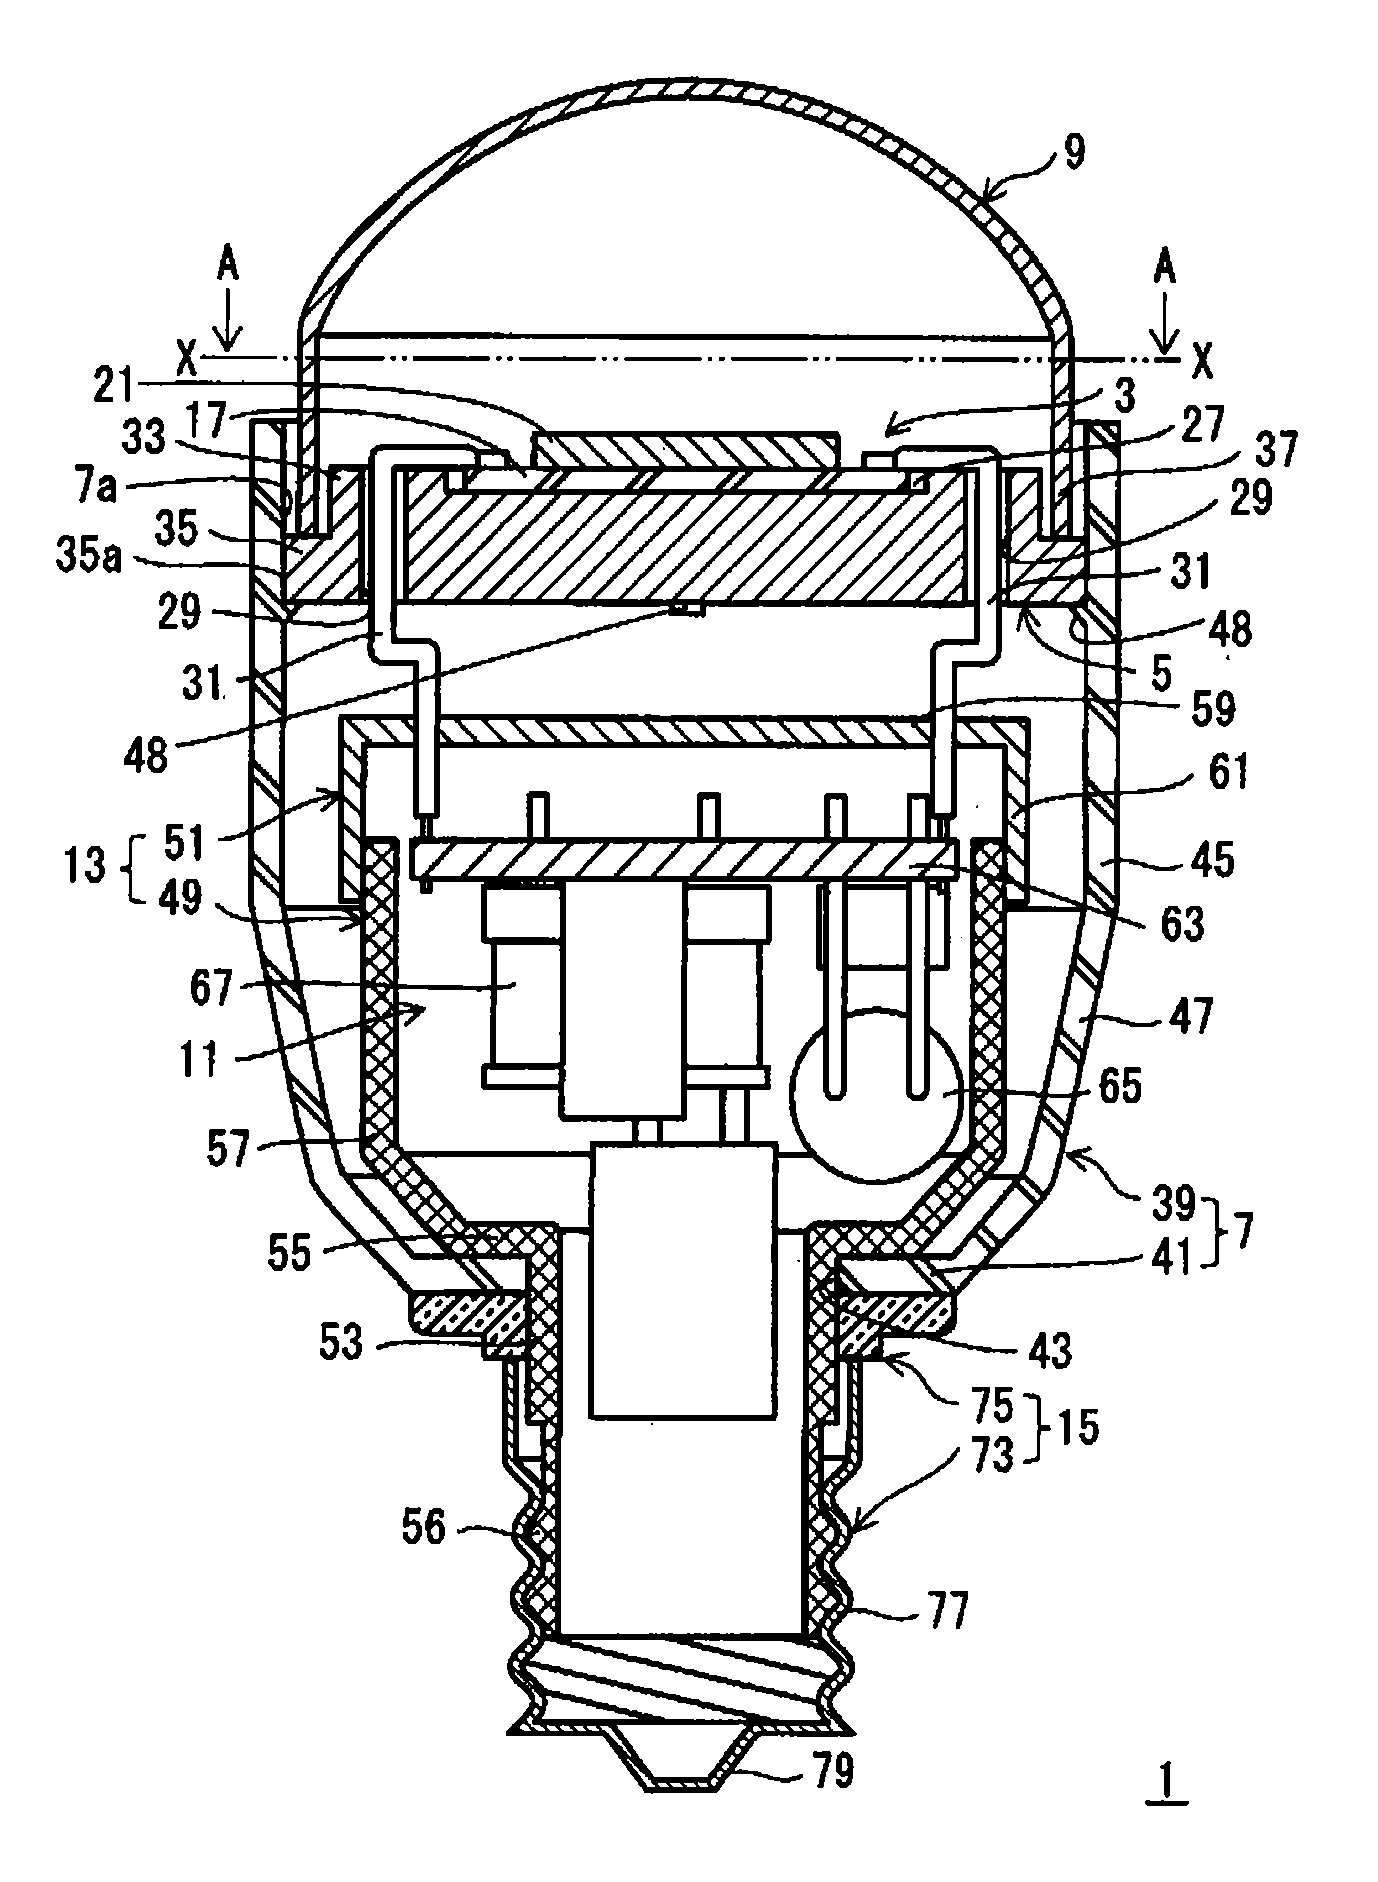 Bulb-shaped lamp and lighting device